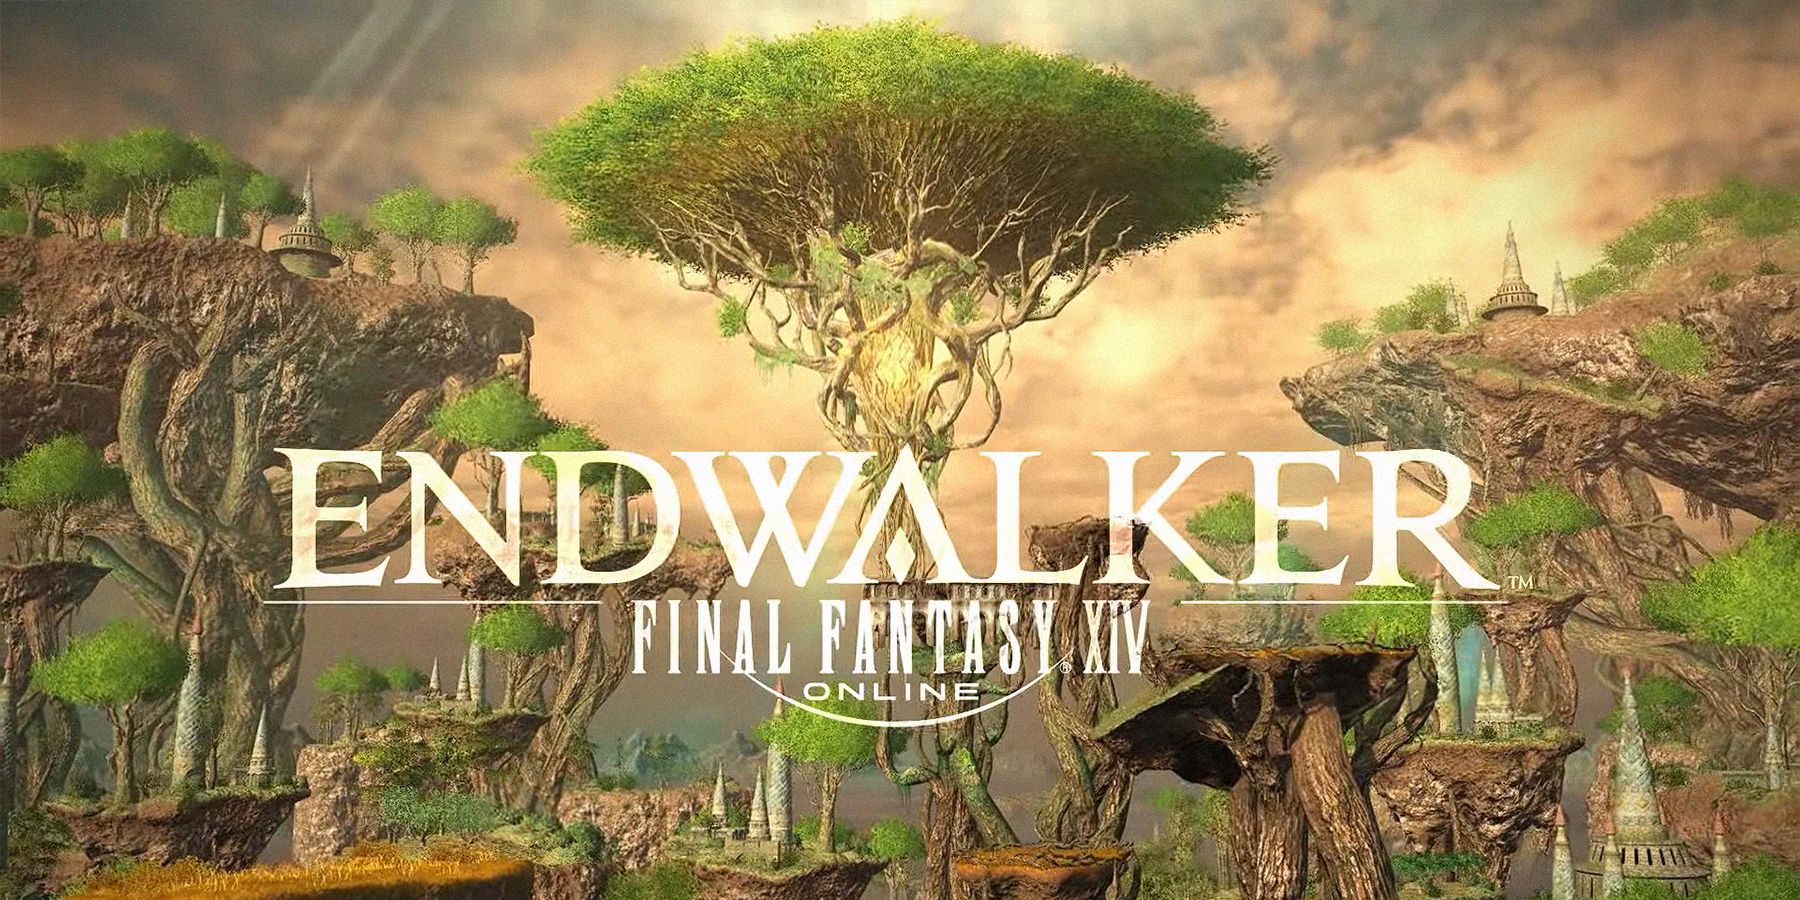 FINAL FANTASY XIV ONLINE REVEALS NEW TRAILER FOR PATCH 6.3 AND